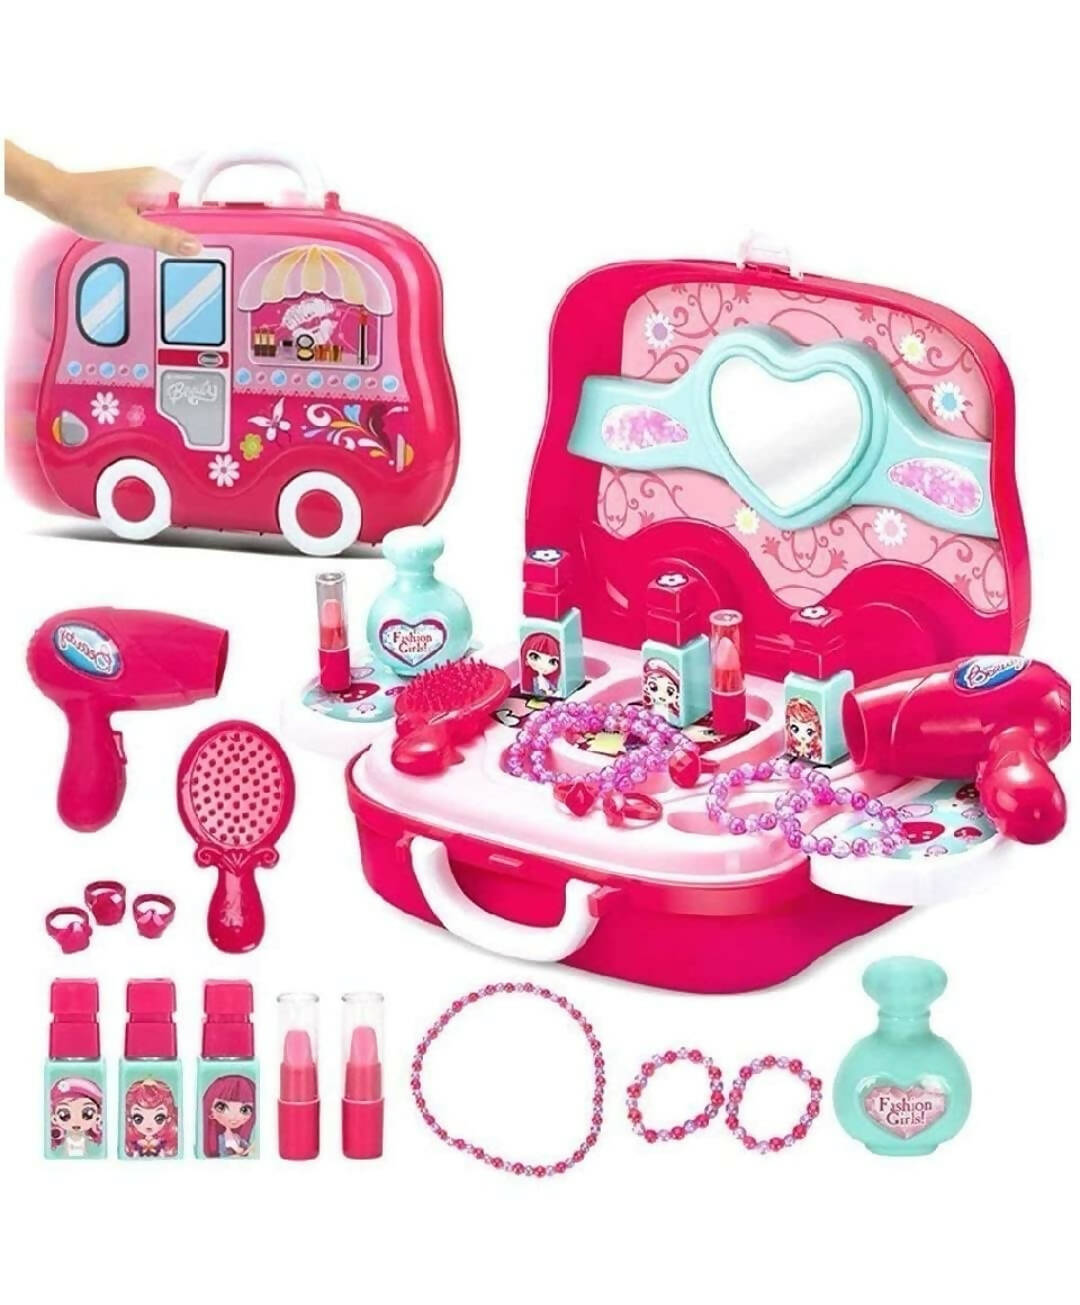 Sardar Ji Ki Dukan Beauty Make Up Case And Cosmetic Set Suitcase With Makeup Accessories For Children Girls- Pink,Plastic,Pack Of 1 Set - Distacart